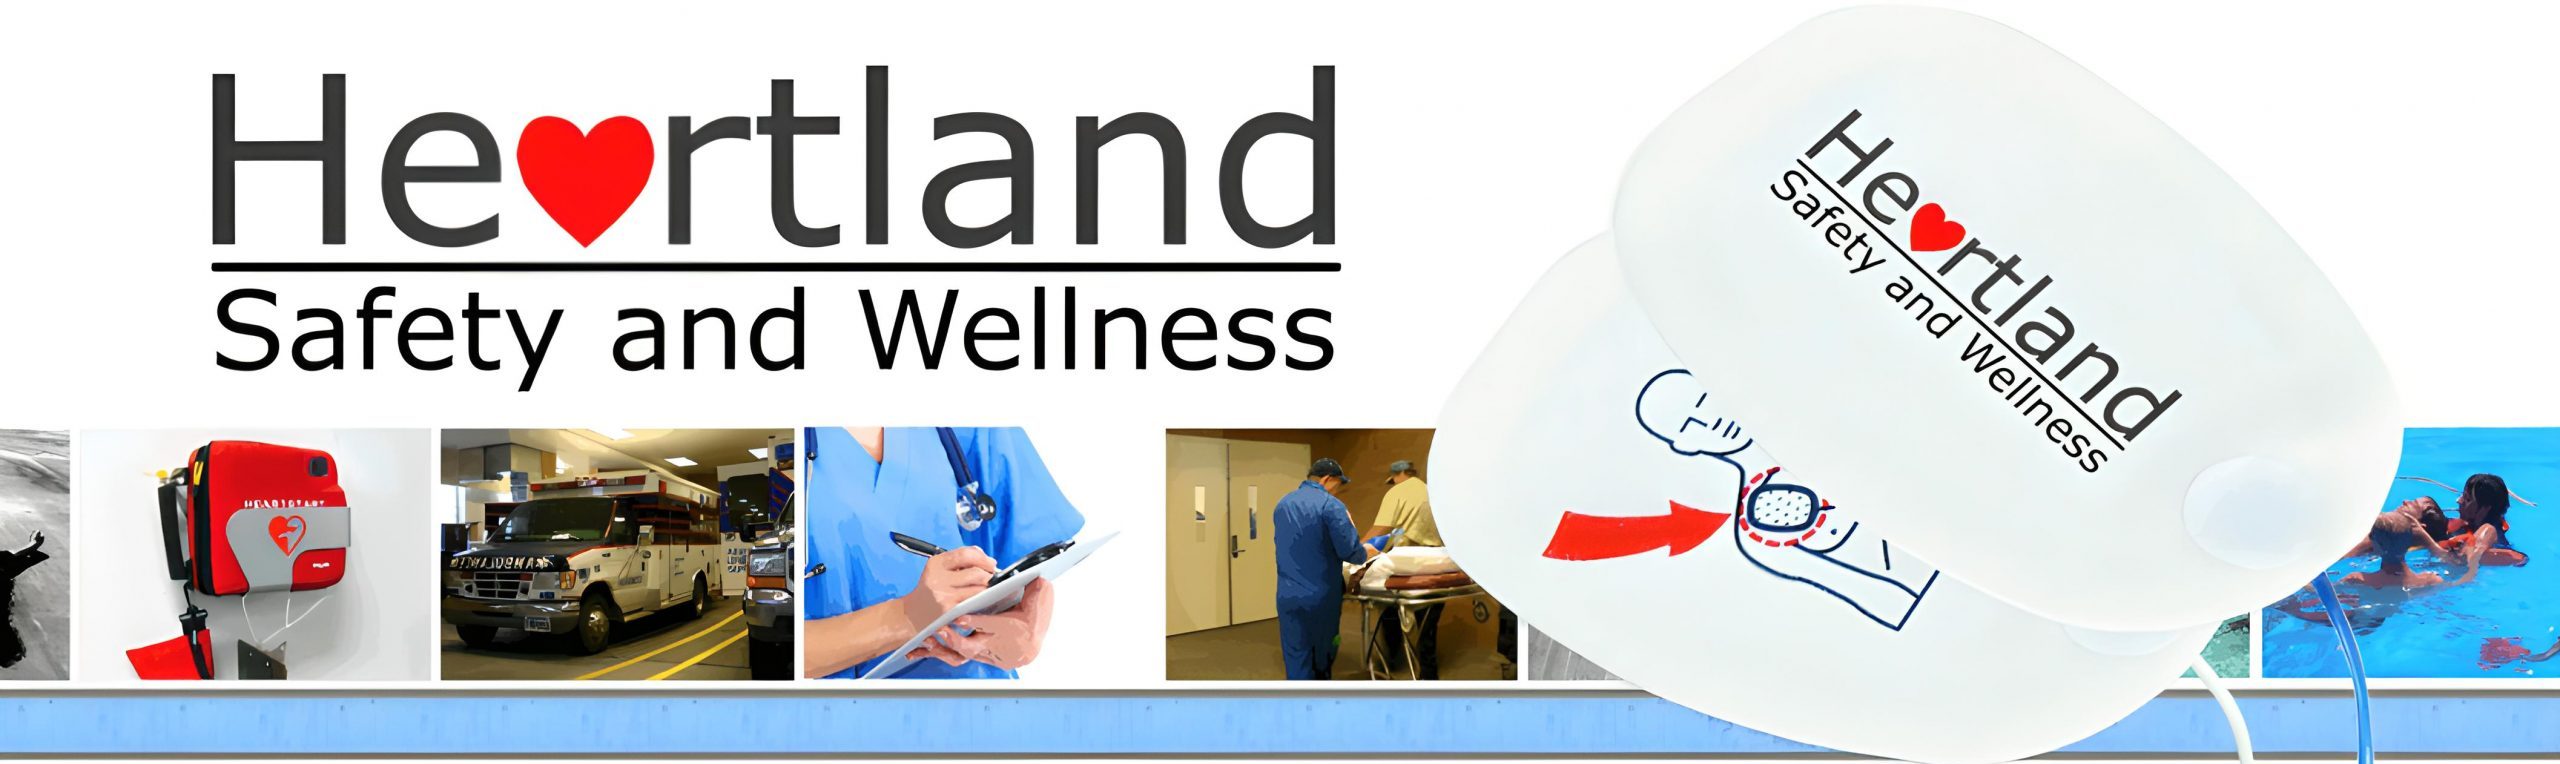 Heartland Safety and Wellness - We provide certified first aid and CPR courses to both businesses and individuals.